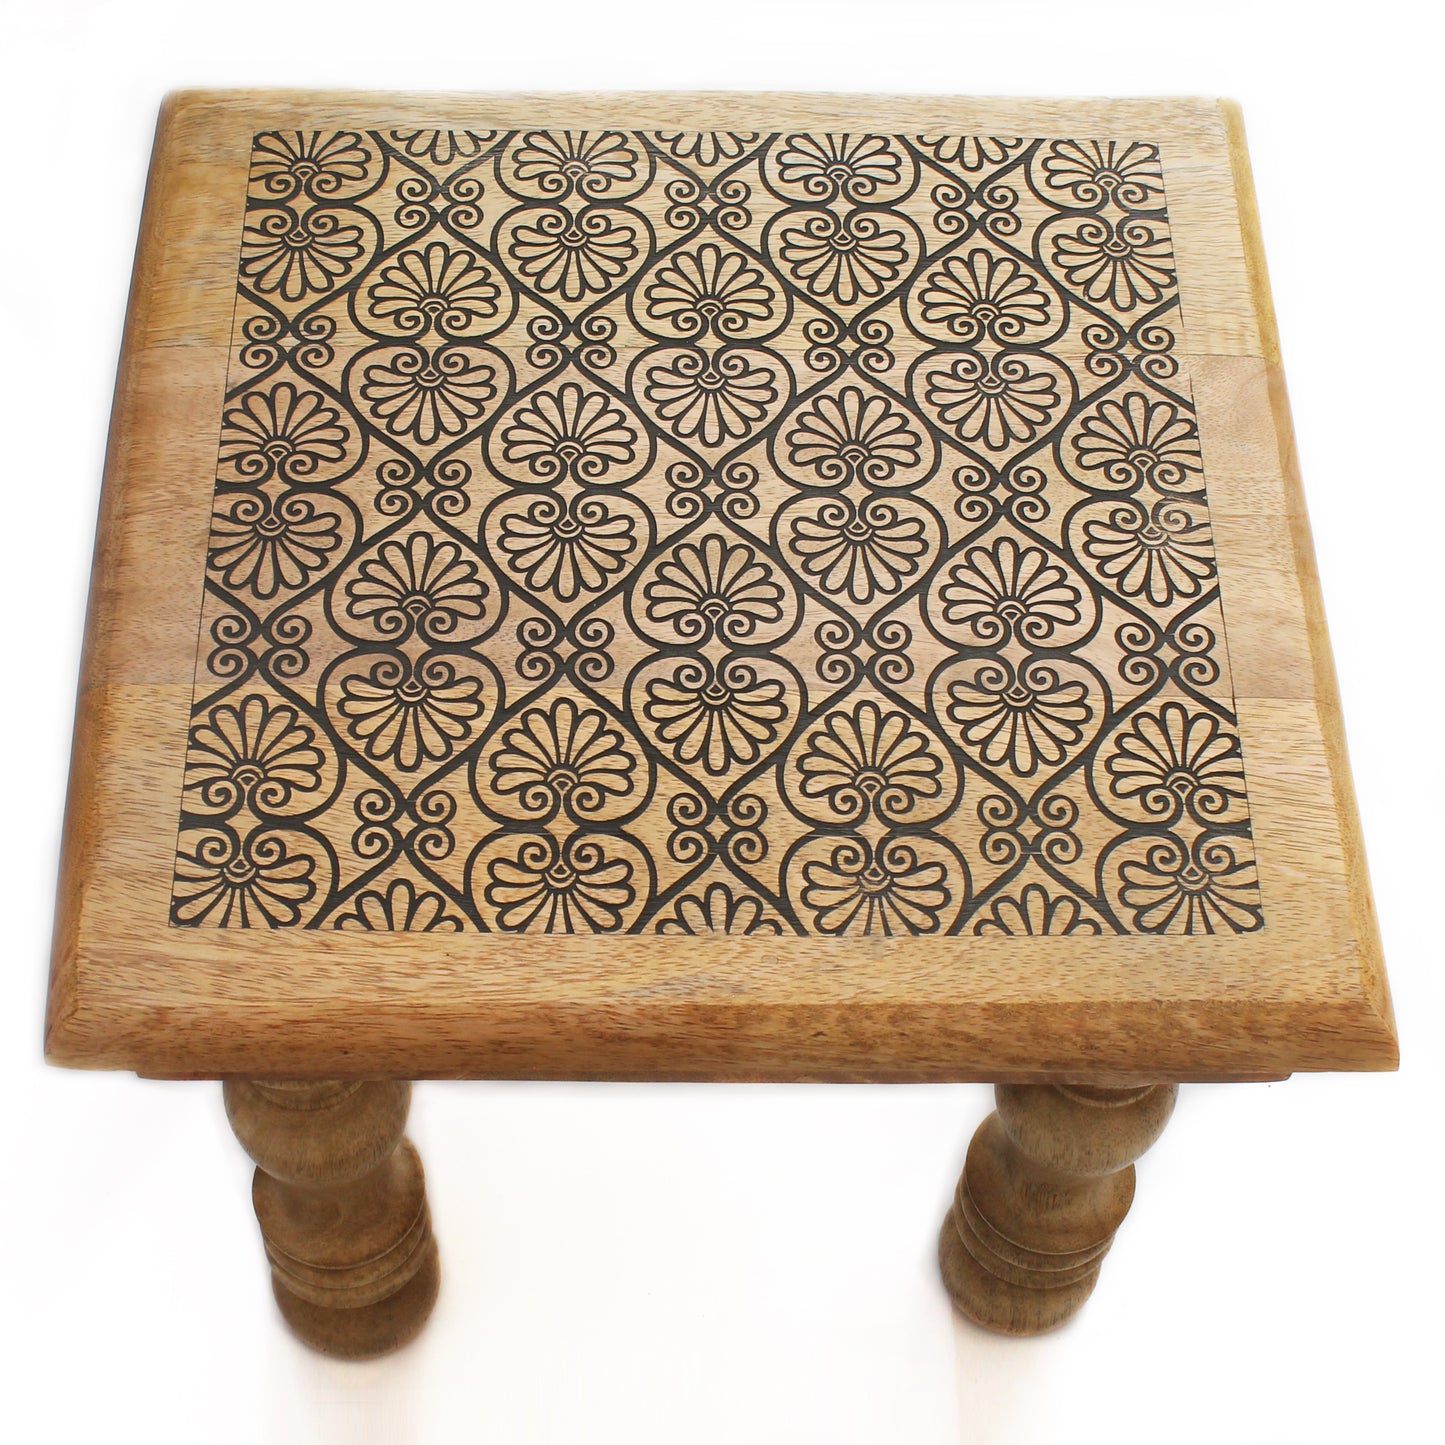 SAVON Wood Stool Footrest Footstool Adults Small Table Gray Victorian Flowers